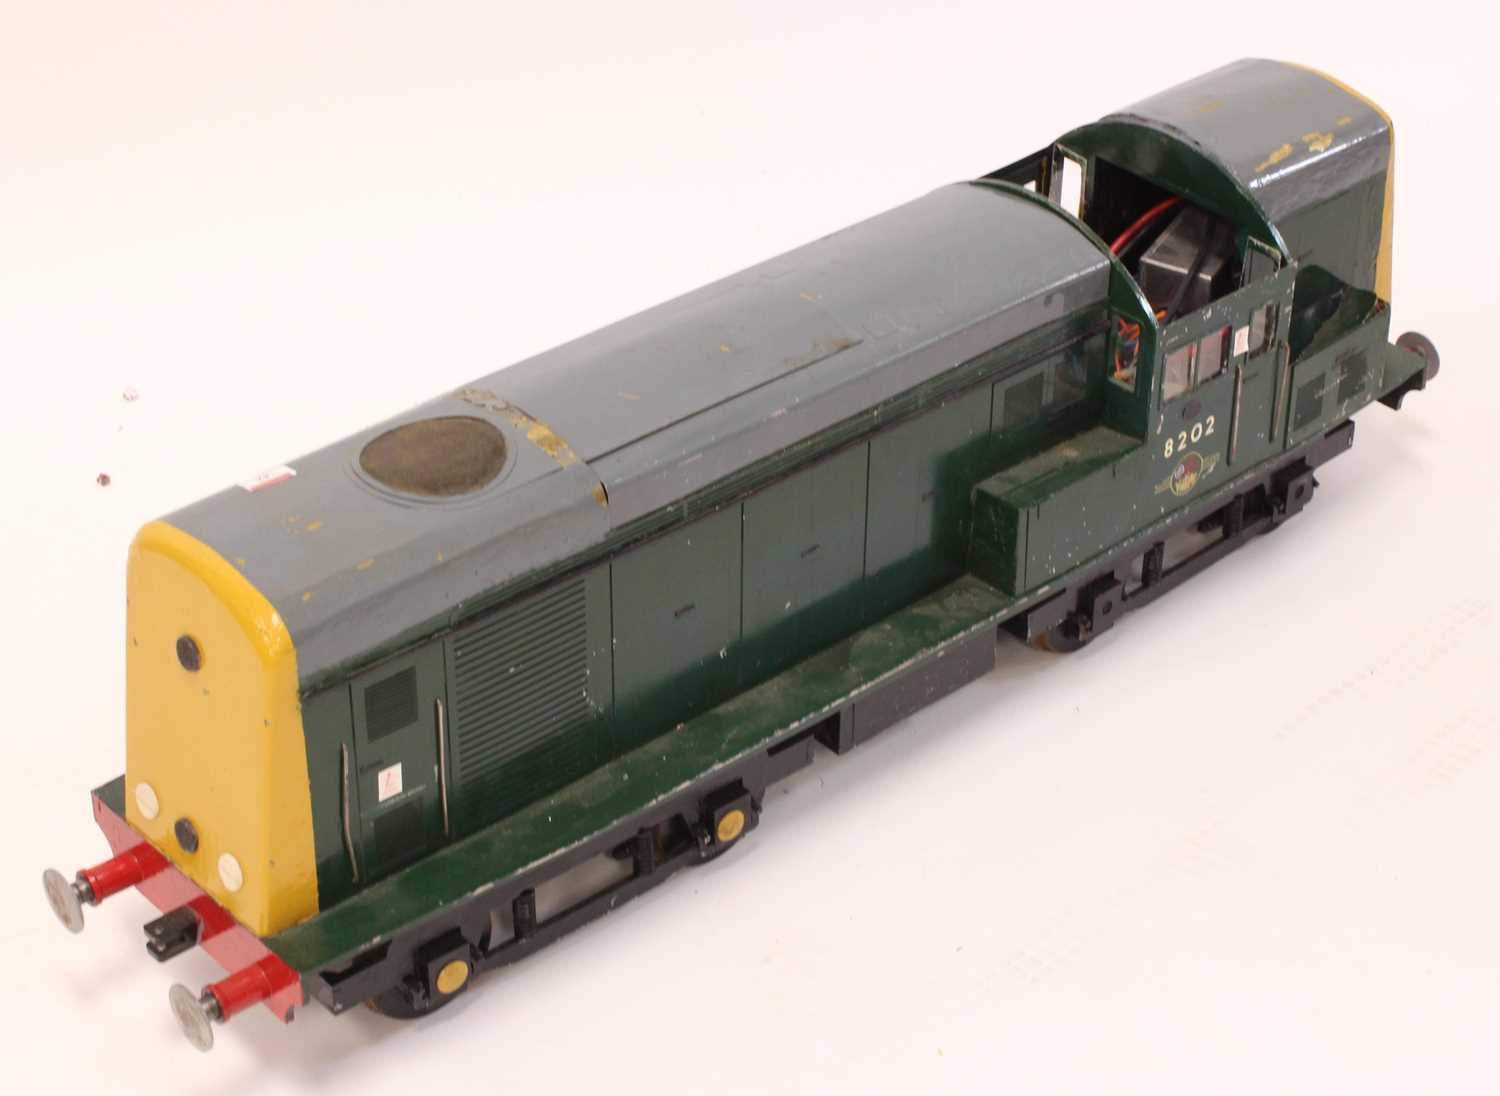 5 inch gauge battery operated model of a Diesel Electric Locomotive, finished in green with Number